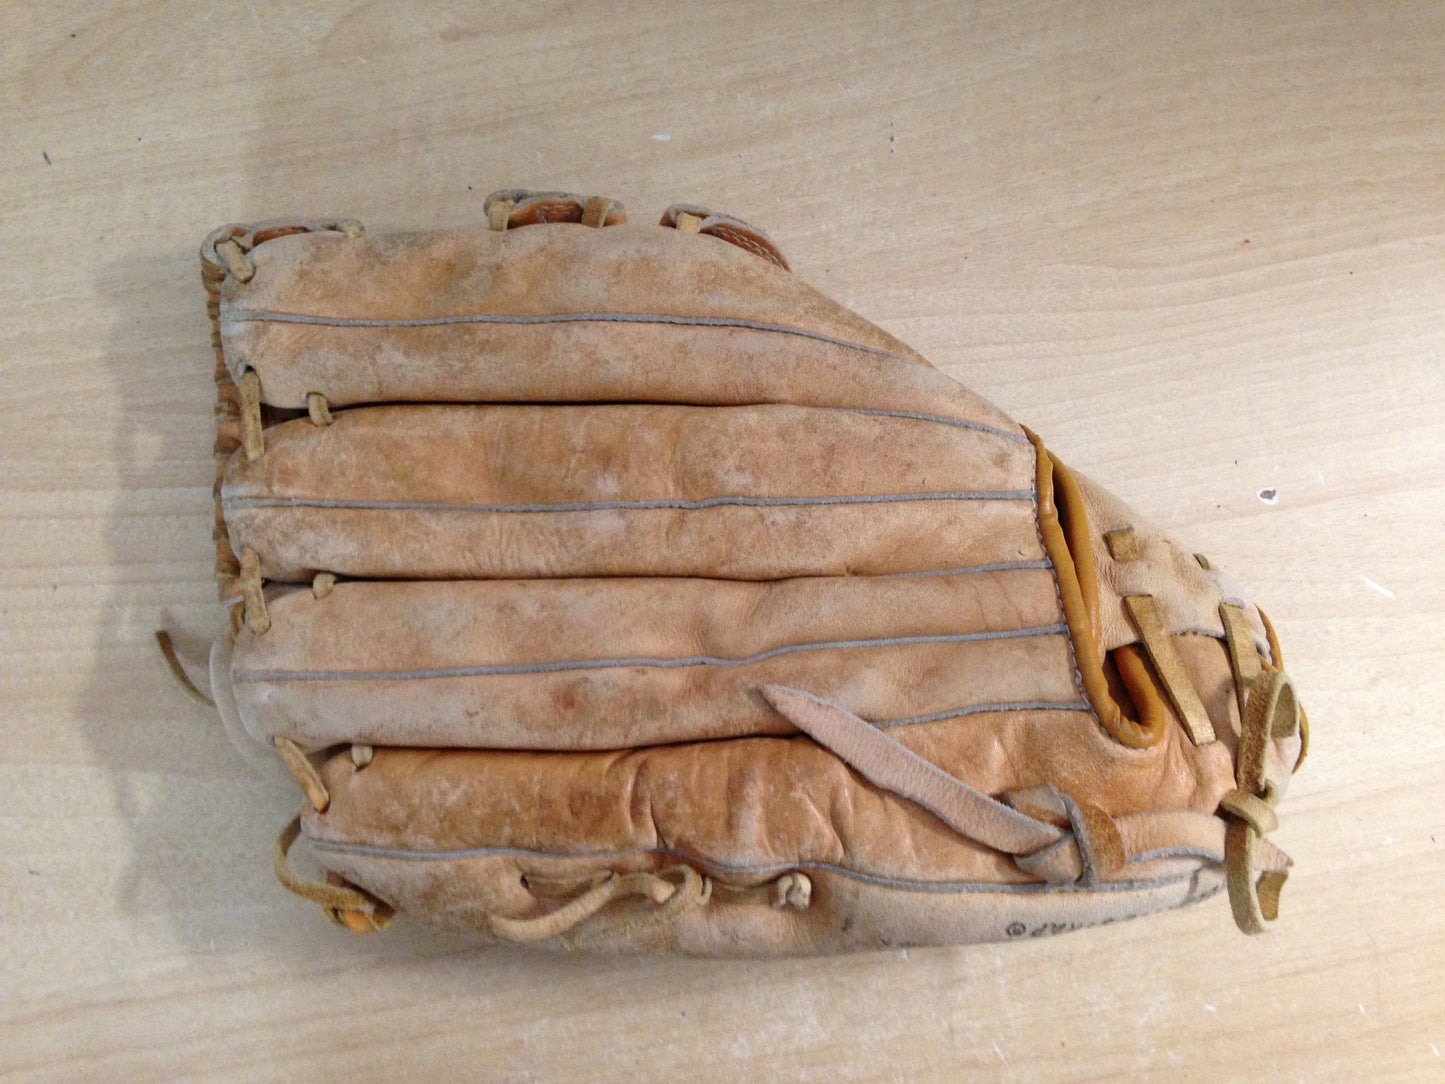 Baseball Glove Adult Size 13 inch Wilson Leather Tan Fits on Left Hand